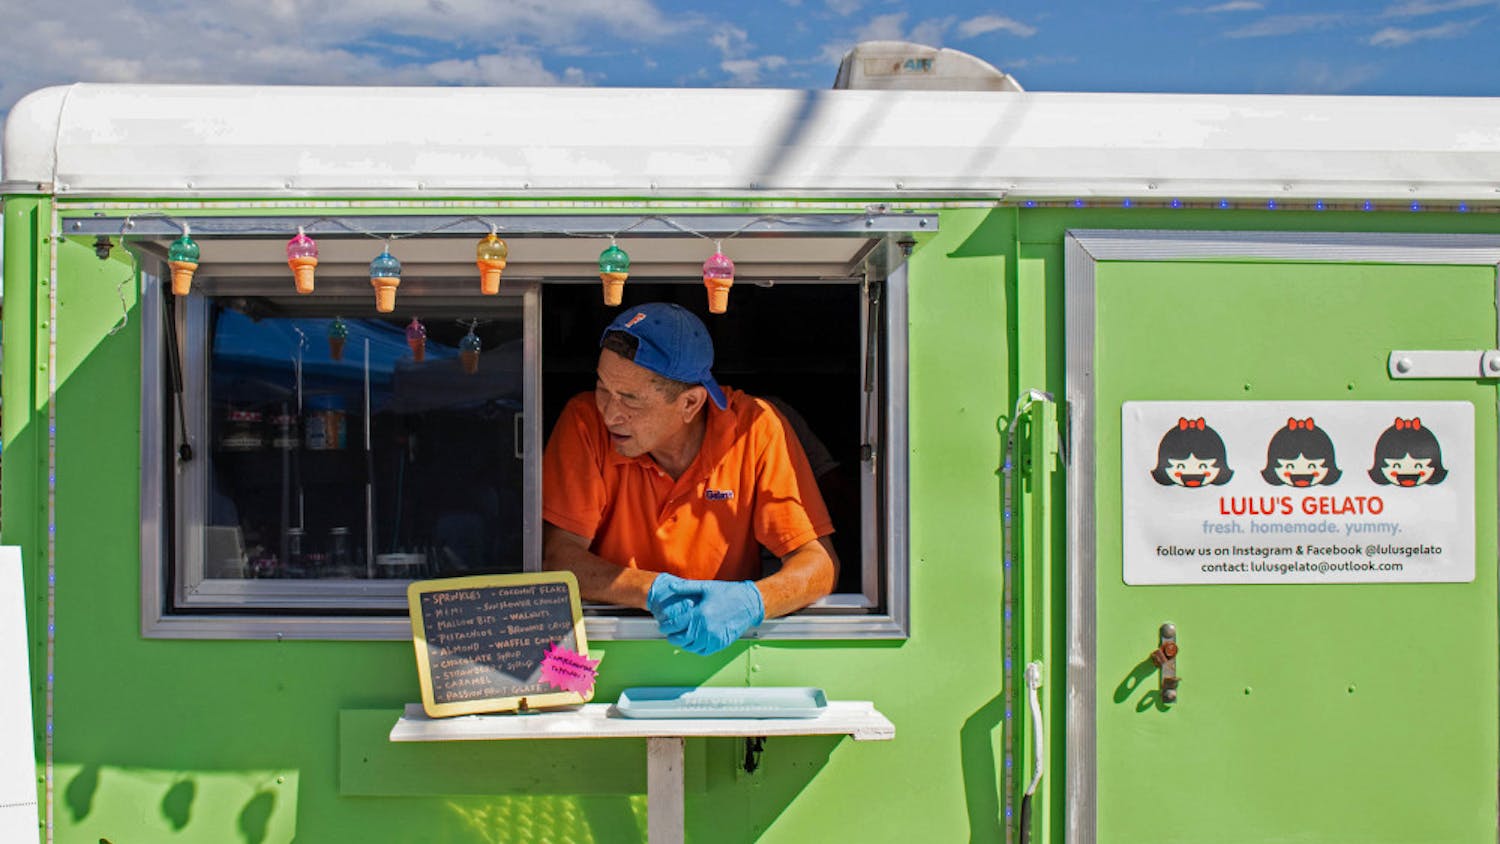 Johnny Ho, the co-owner of Lulu’s Gelato, takes a break in his food truck Sunday afternoon during the First International Food Truck Rally at First Magnitude Brewing Company. Ho and his wife, Tina, have been in the food industry for close to five decades, but now they focus on their gelato truck which they named after their granddaughter Lulu. They make small-batch gelato and sorbetto. Their food truck is normally located at the Jonesville Persimmon and Fruit Tree Nursery. 